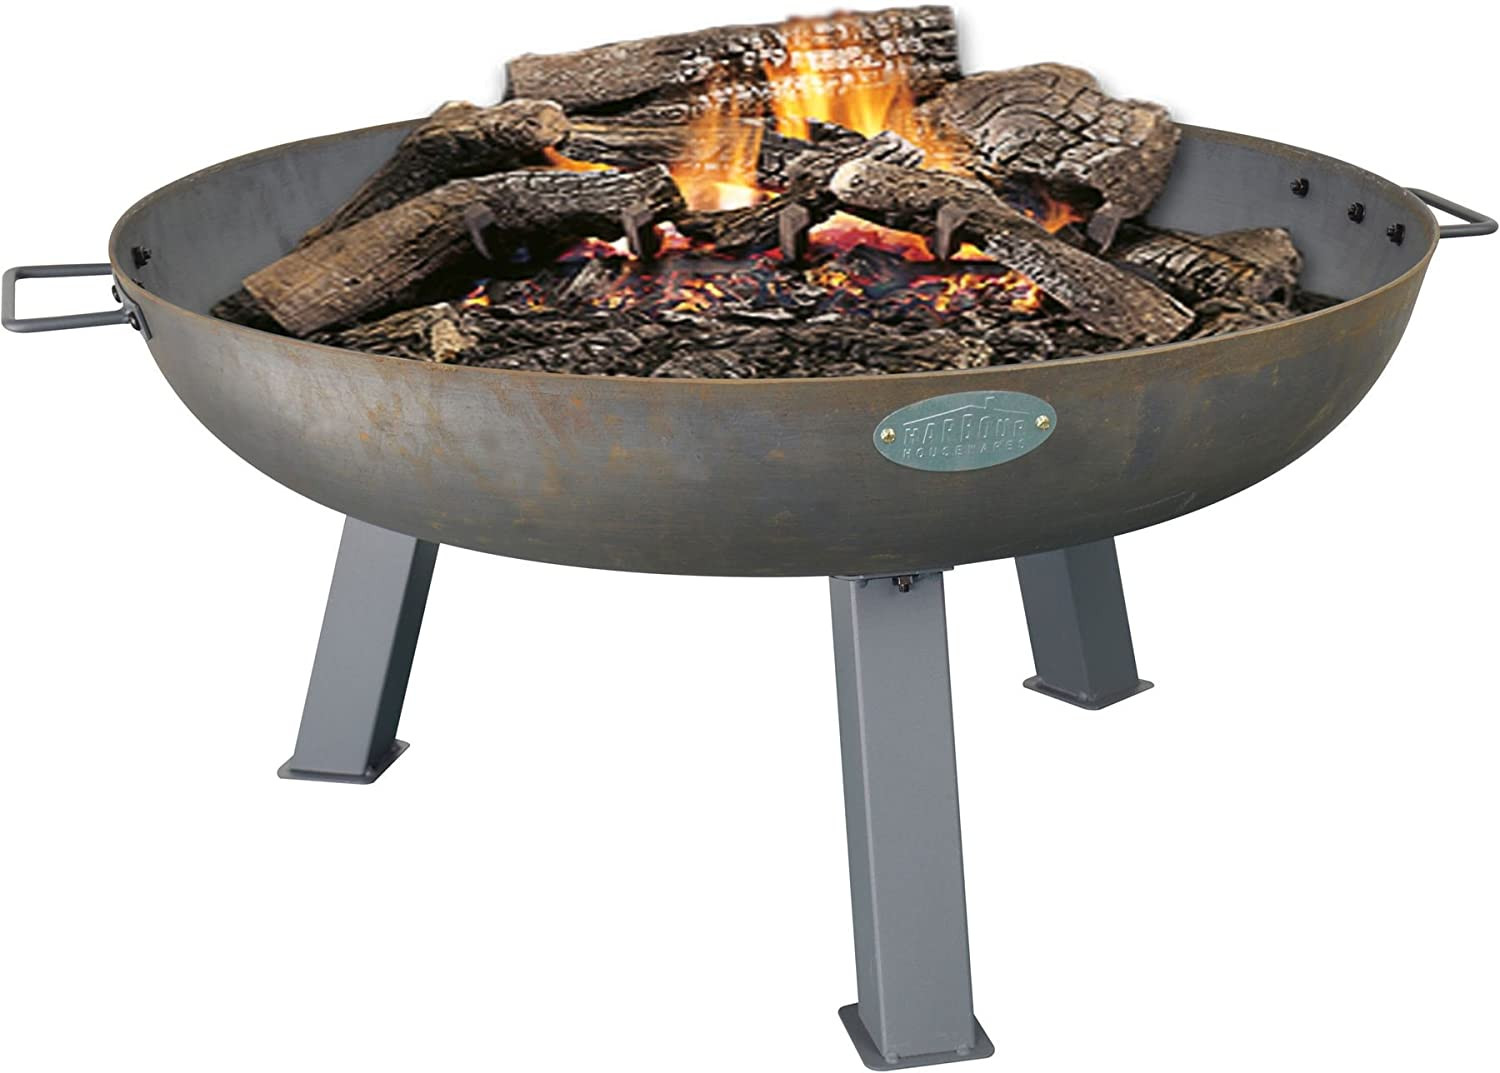 Best Patio Fire Pit
 13 Best Fire Pits in The UK in 2018 OUTDOOR FIRE PITS